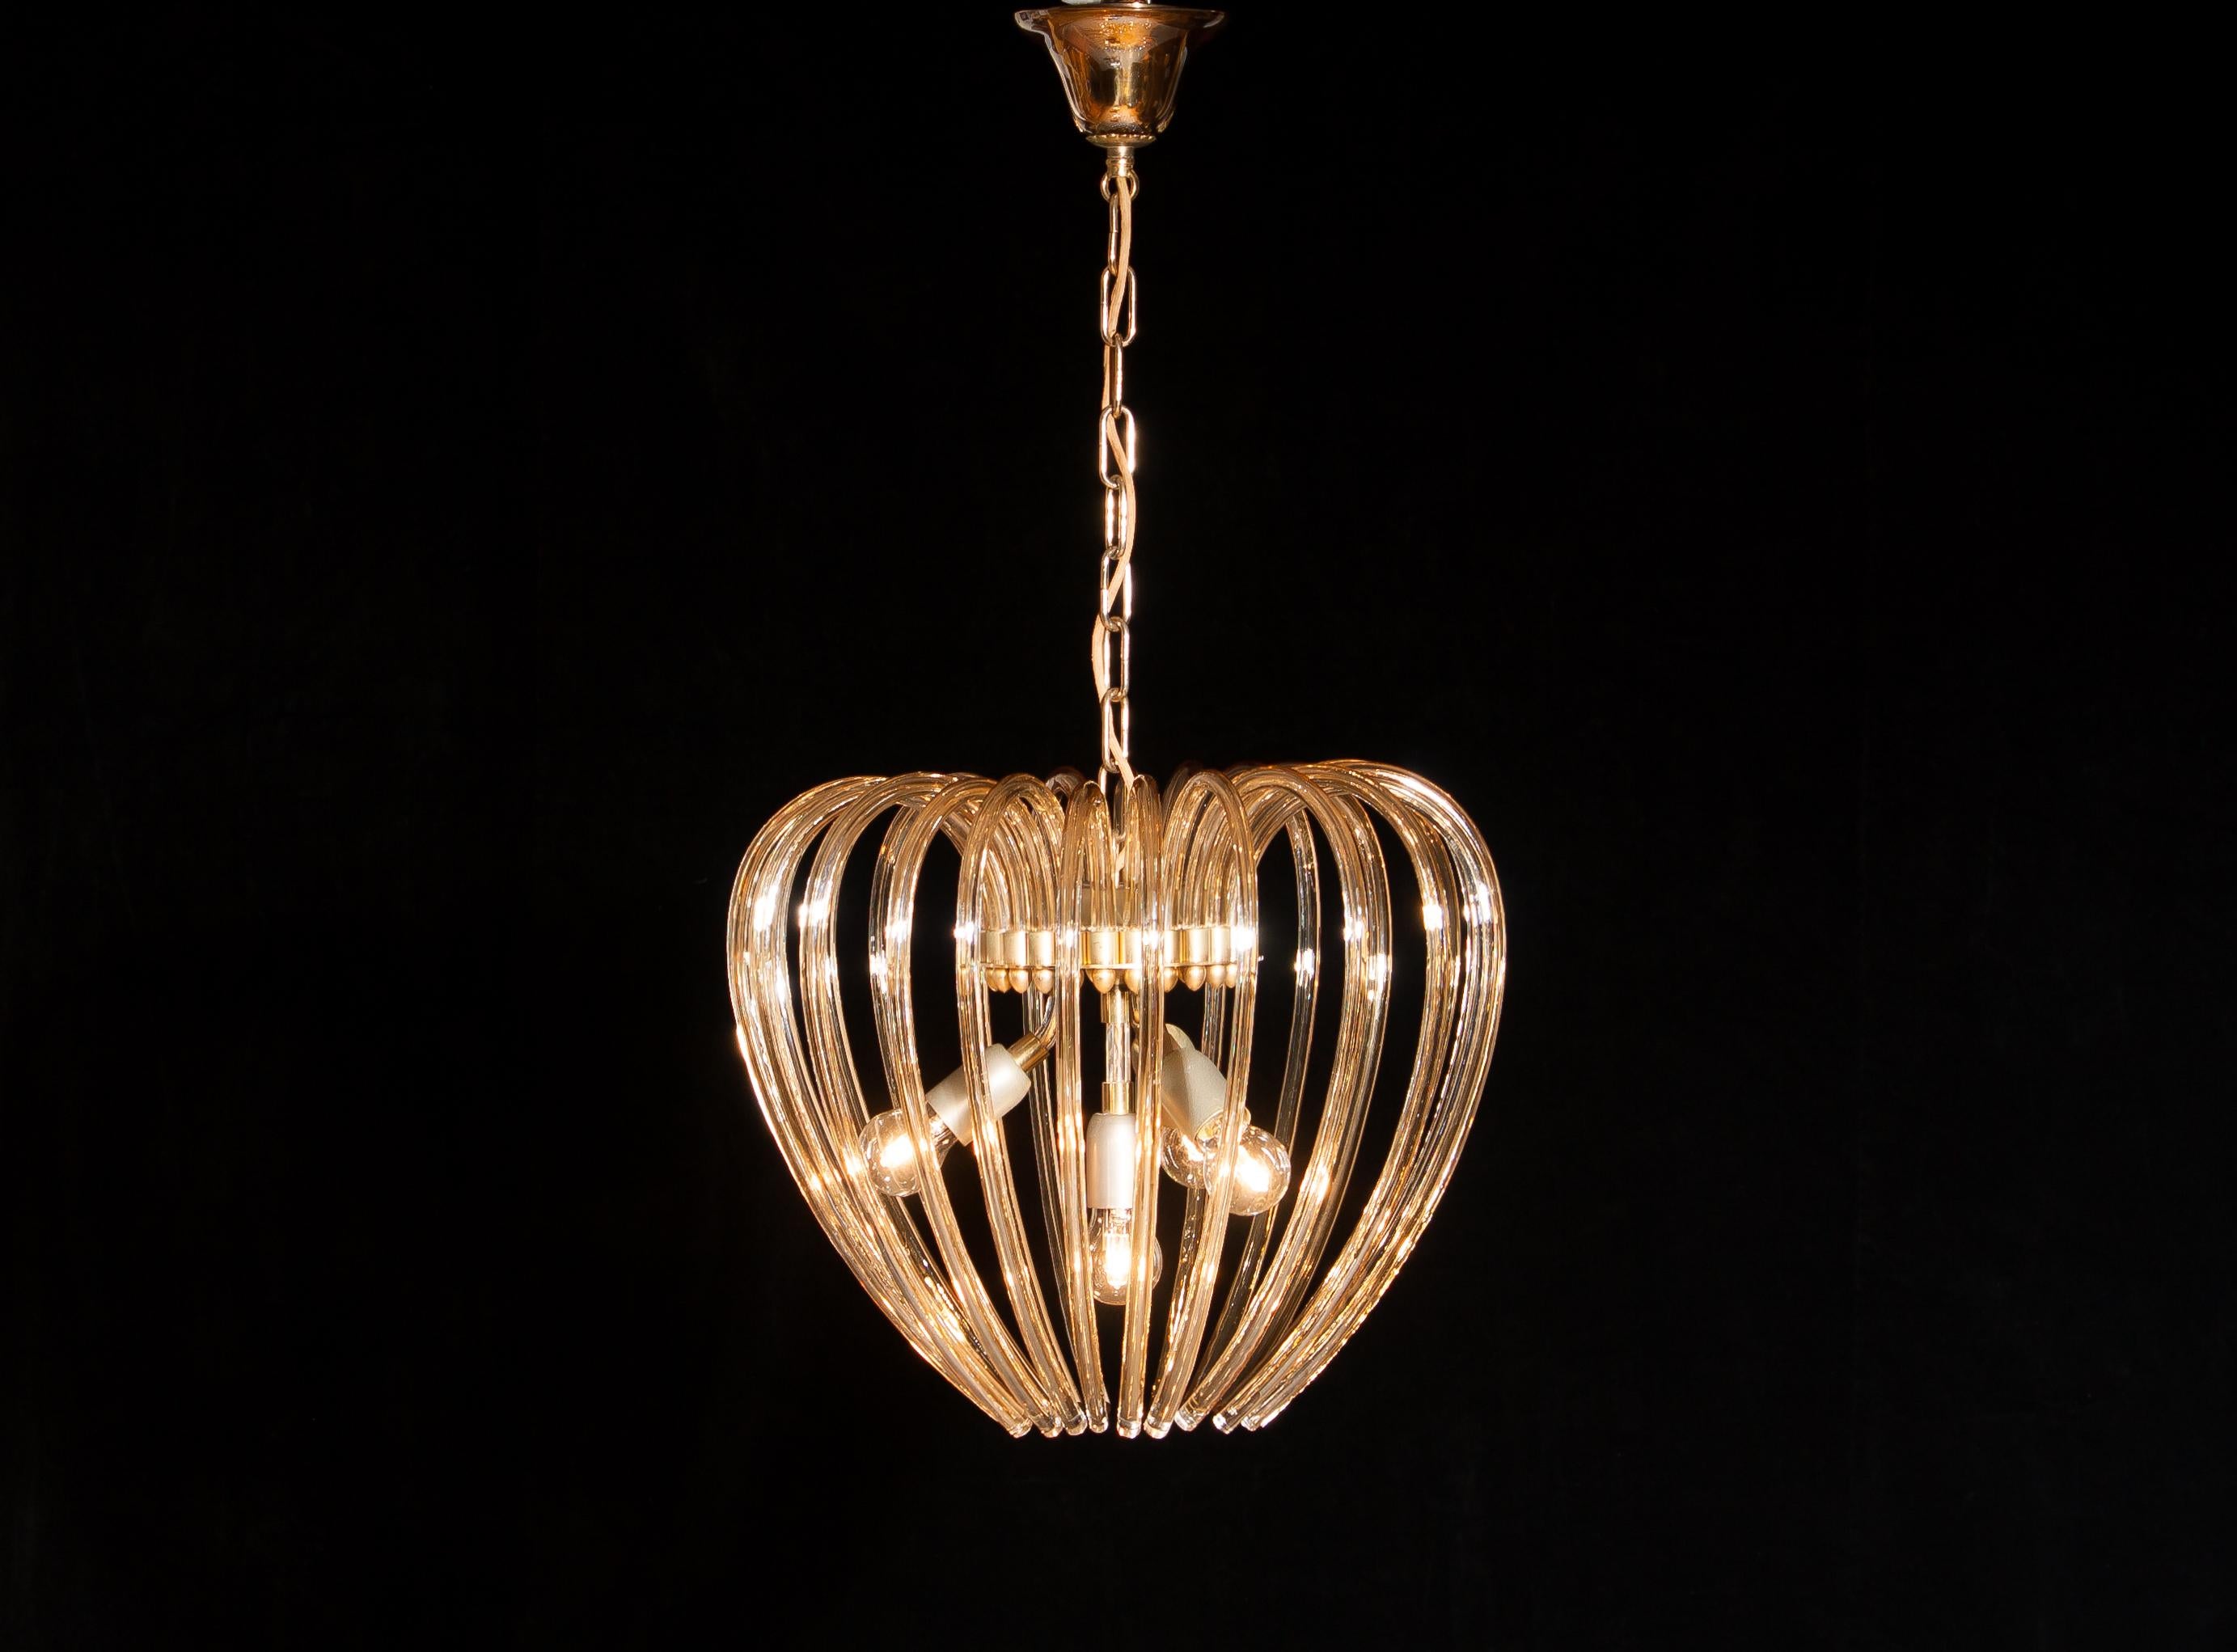 Lovely chandelier by Murano, Italy.
This lamp has a beautiful heart shape made of gilded crystal elements.
It is in excellent condition.
Period 1960s.
Dimension: Total height 90cm, ø.50 cm.